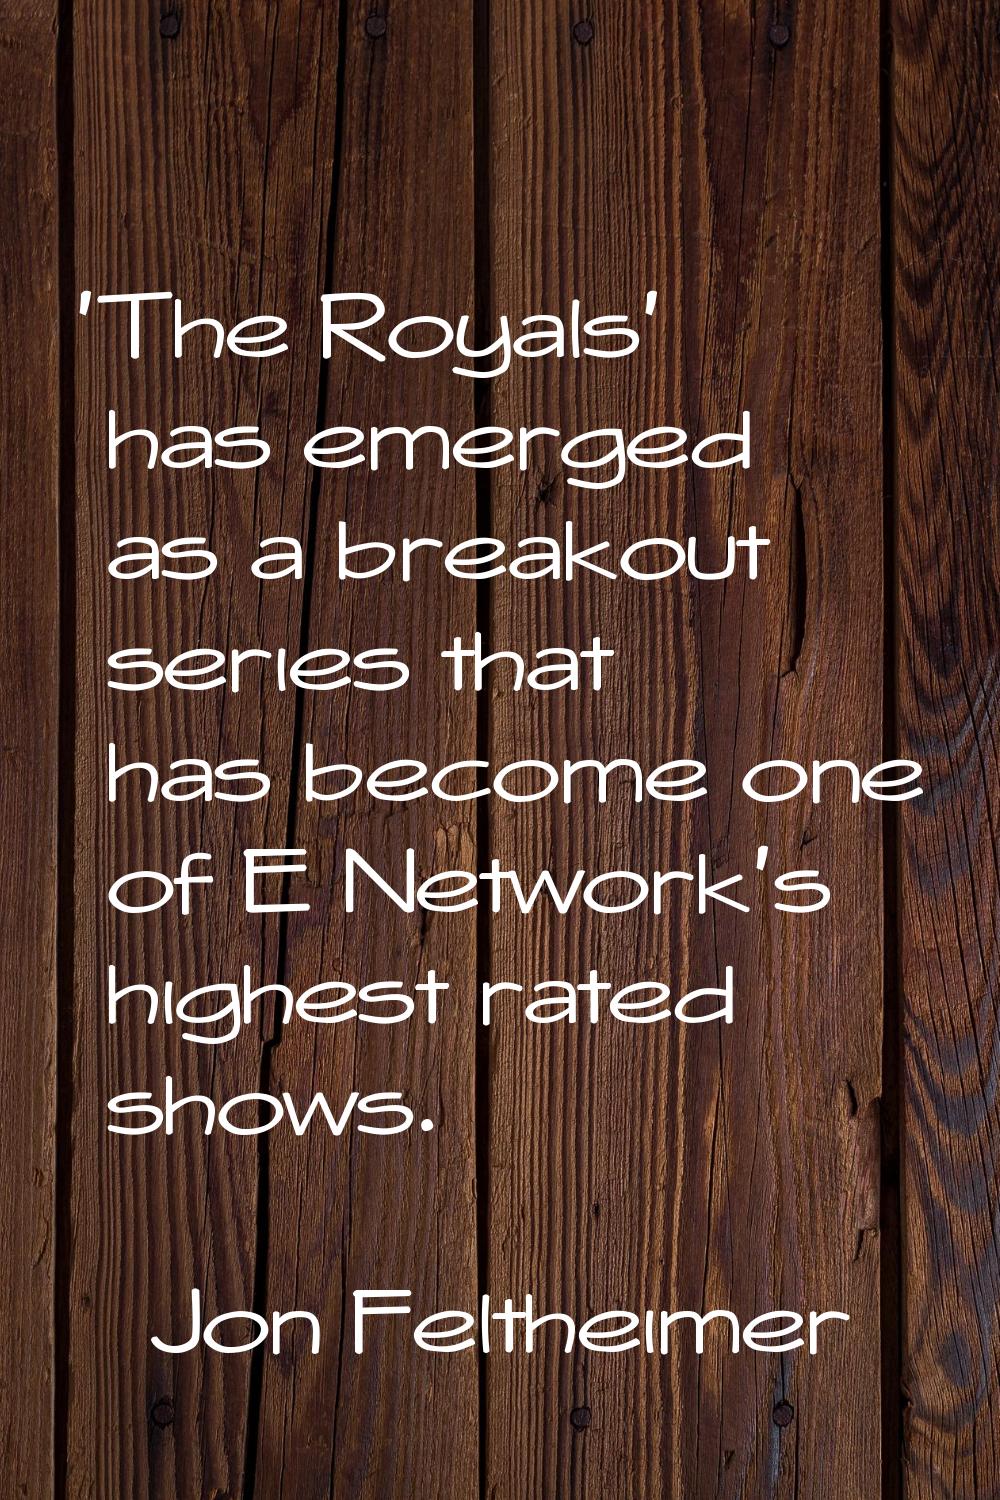 'The Royals' has emerged as a breakout series that has become one of E Network's highest rated show